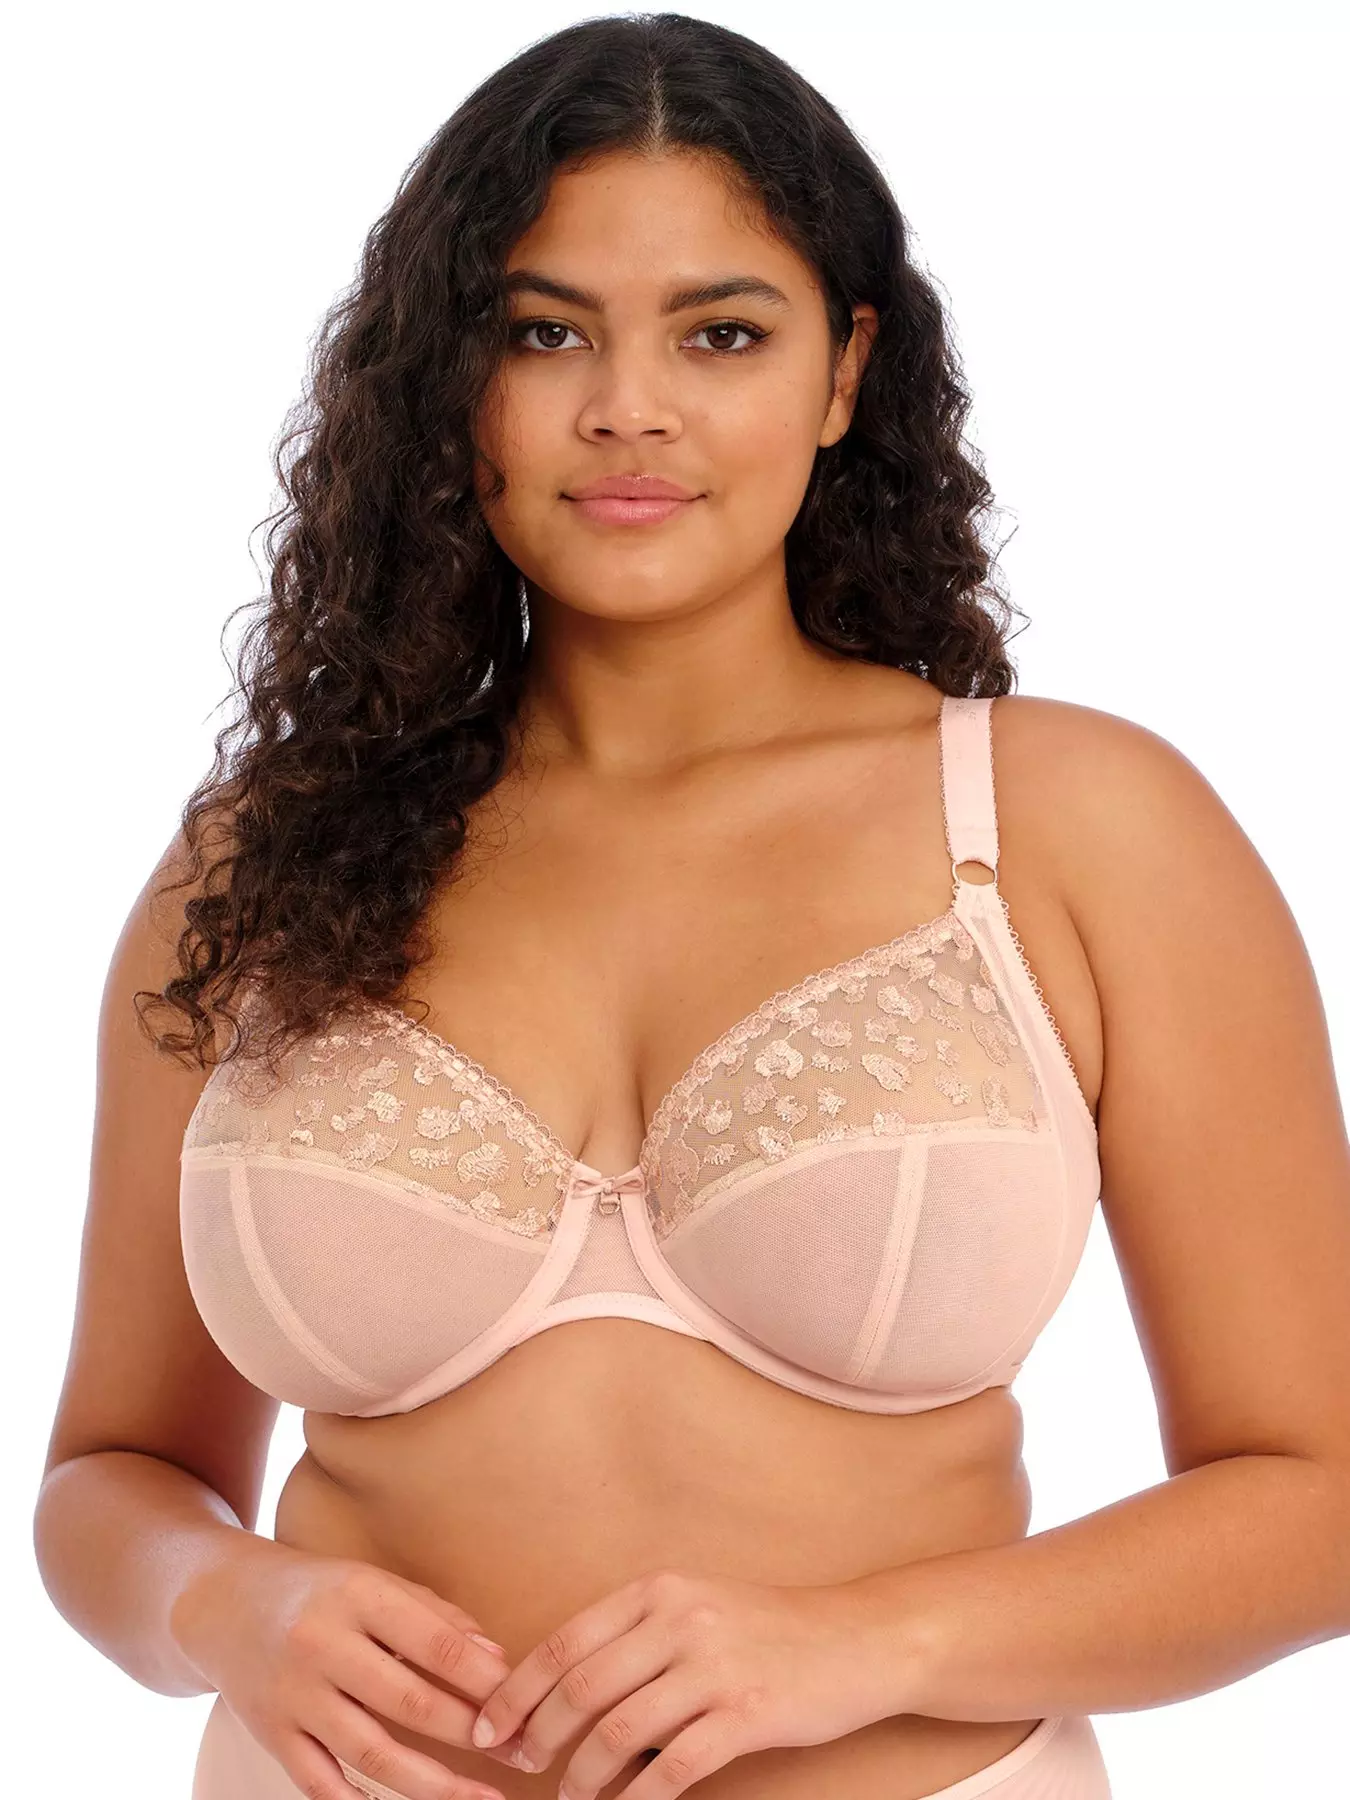 Plus size lingerie with lace bra and G-string - Fashione Shanone